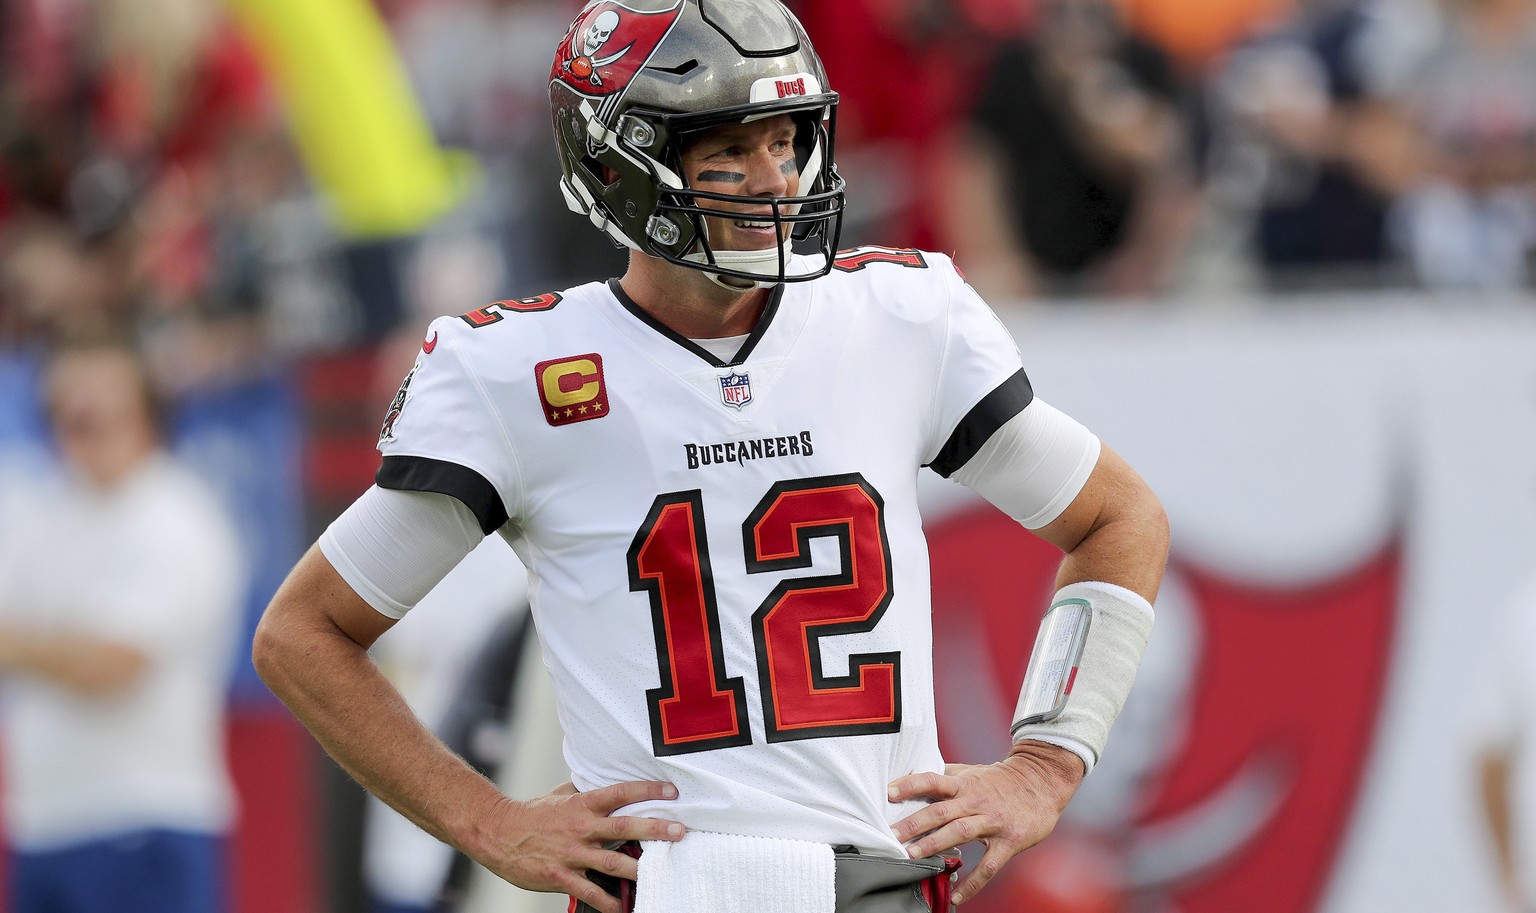 Tampa Bay Buccaneers quarterback Tom Brady (12) looks at the sideline for instructions during a NFL football game against the Carolina Panthers, Sunday, Jan. 9, 2022, in Tampa, Fla. The Buccaneers pla ...